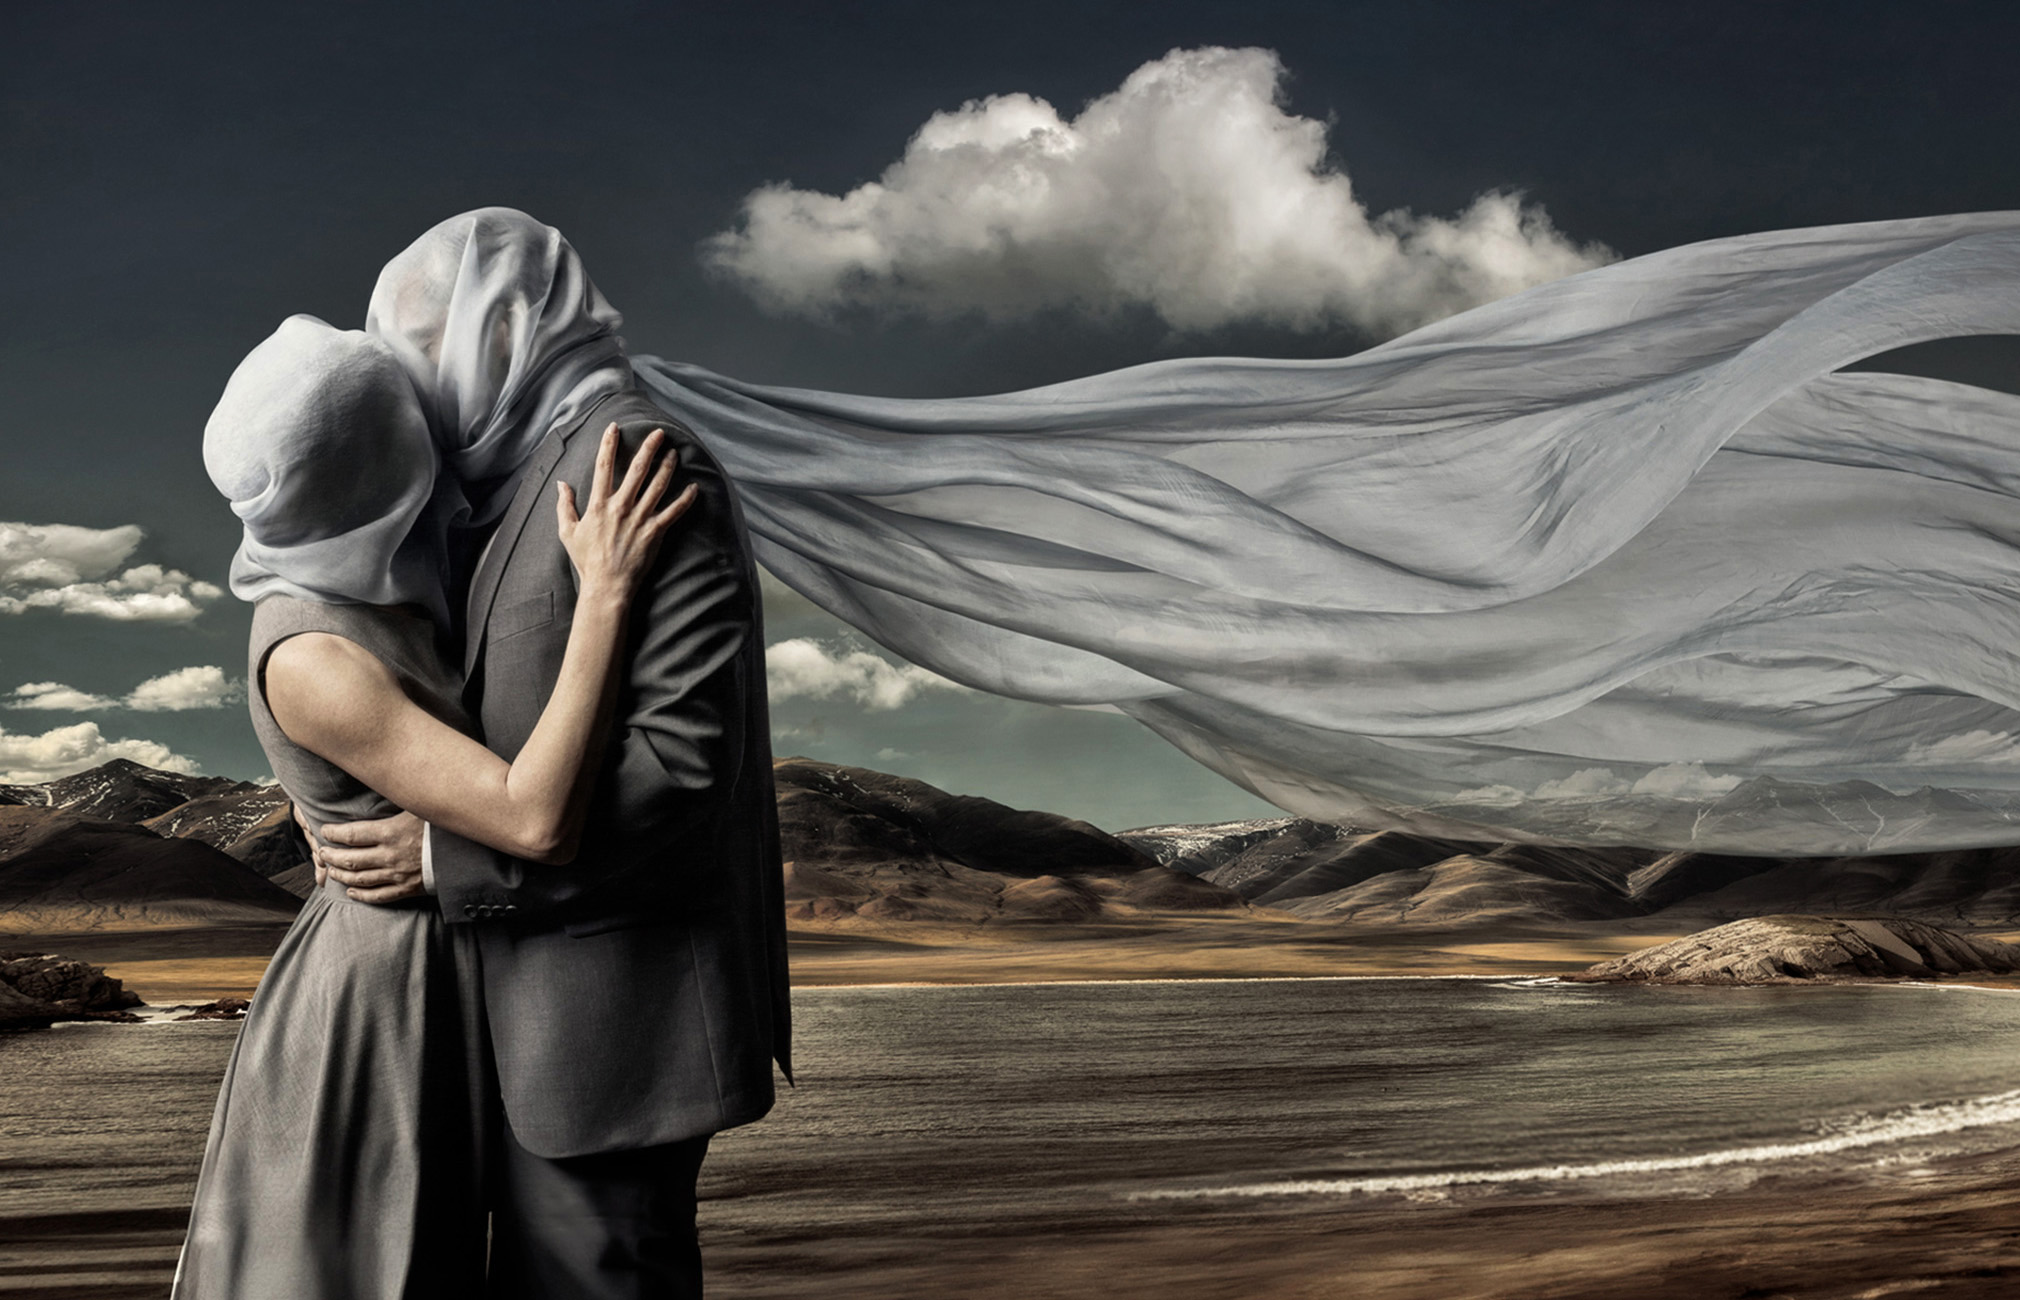 A couple embraces each other in a dramatic landscape, their faces are veiled, fabric blowing in the wind against a background of mountains and sky.